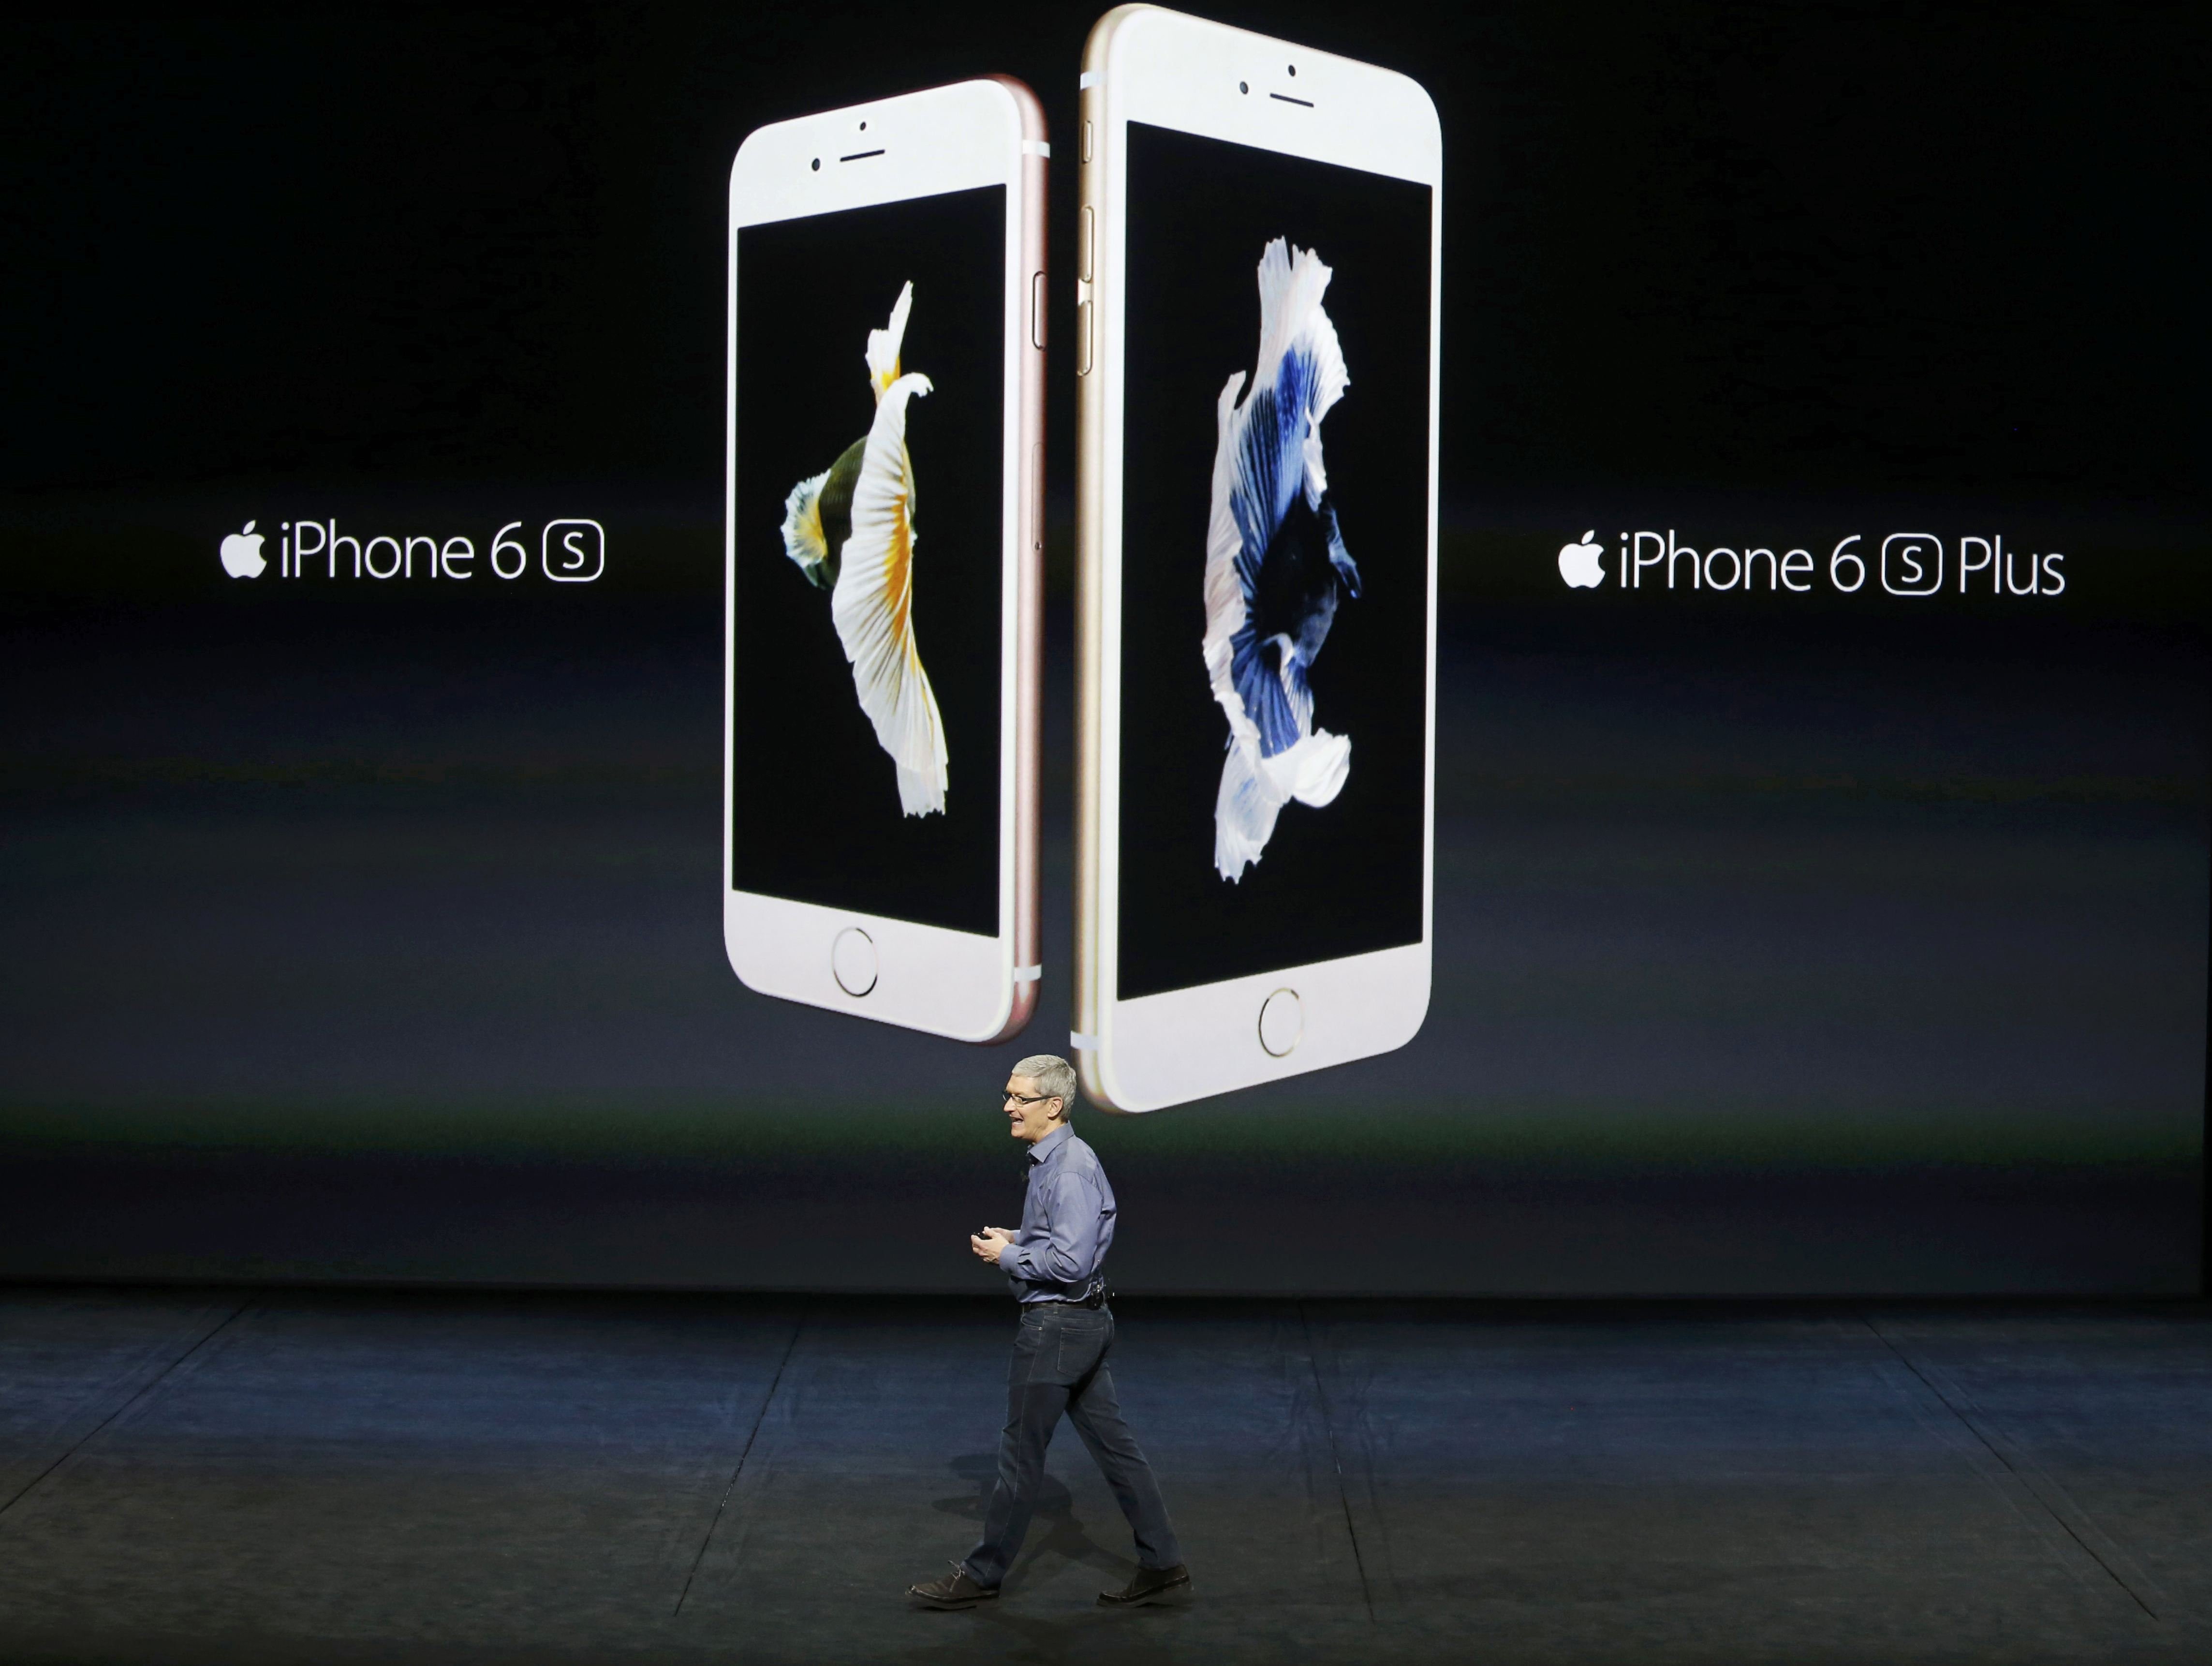 Apple CEO Tim Cook introduces the iPhone 6s and iPhone 6sPlus during an Apple media event in San Francisco, on Sept. 9, 2015. (Beck Diefenbach—Reuters)